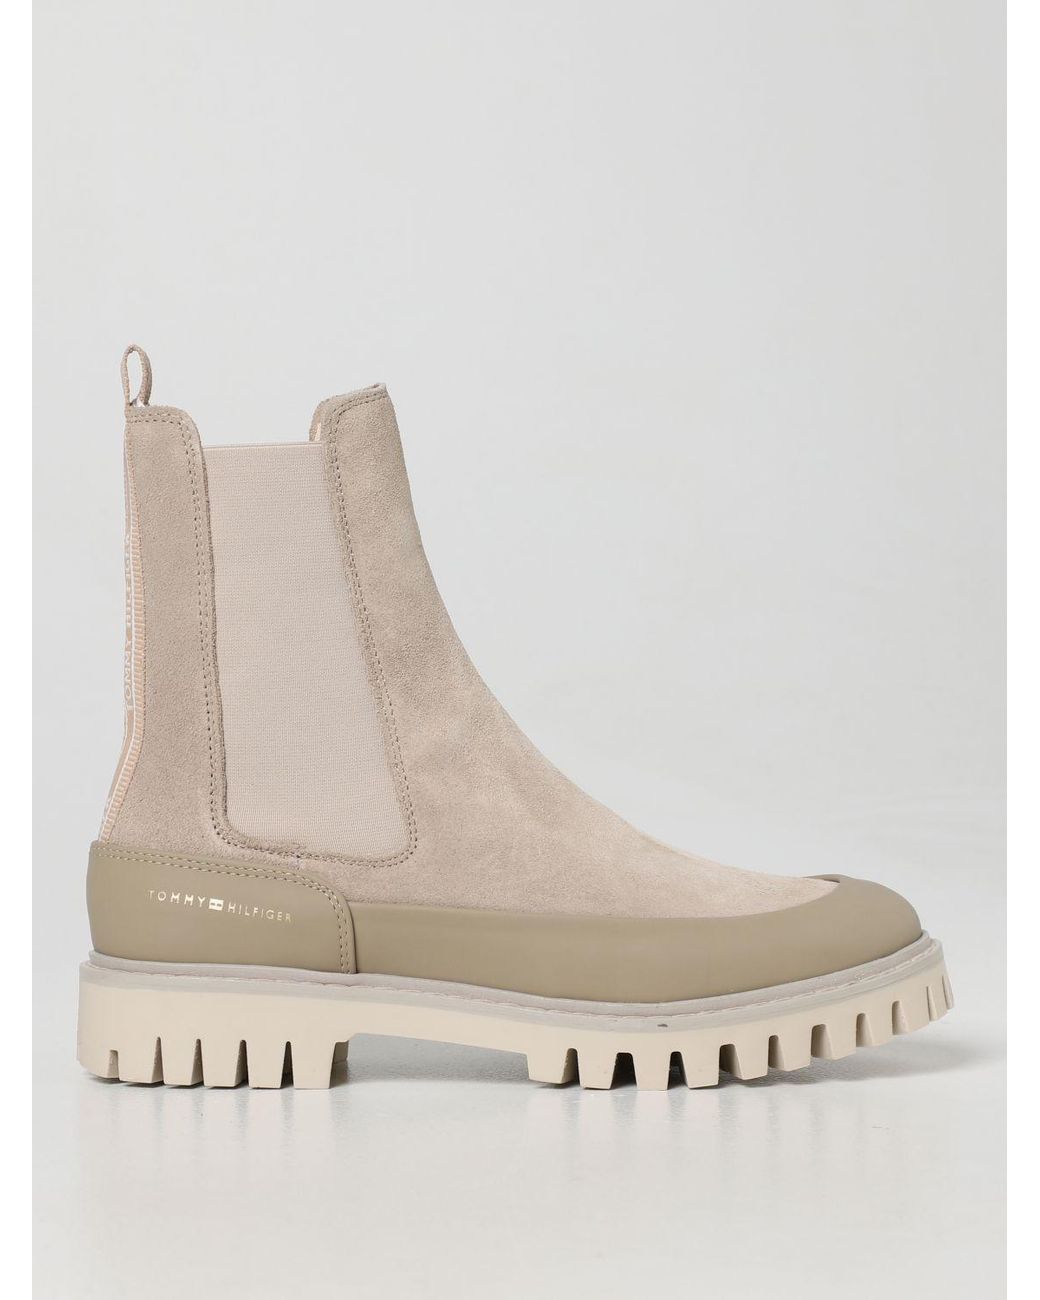 Tommy Hilfiger Flat Booties in Natural | Lyst